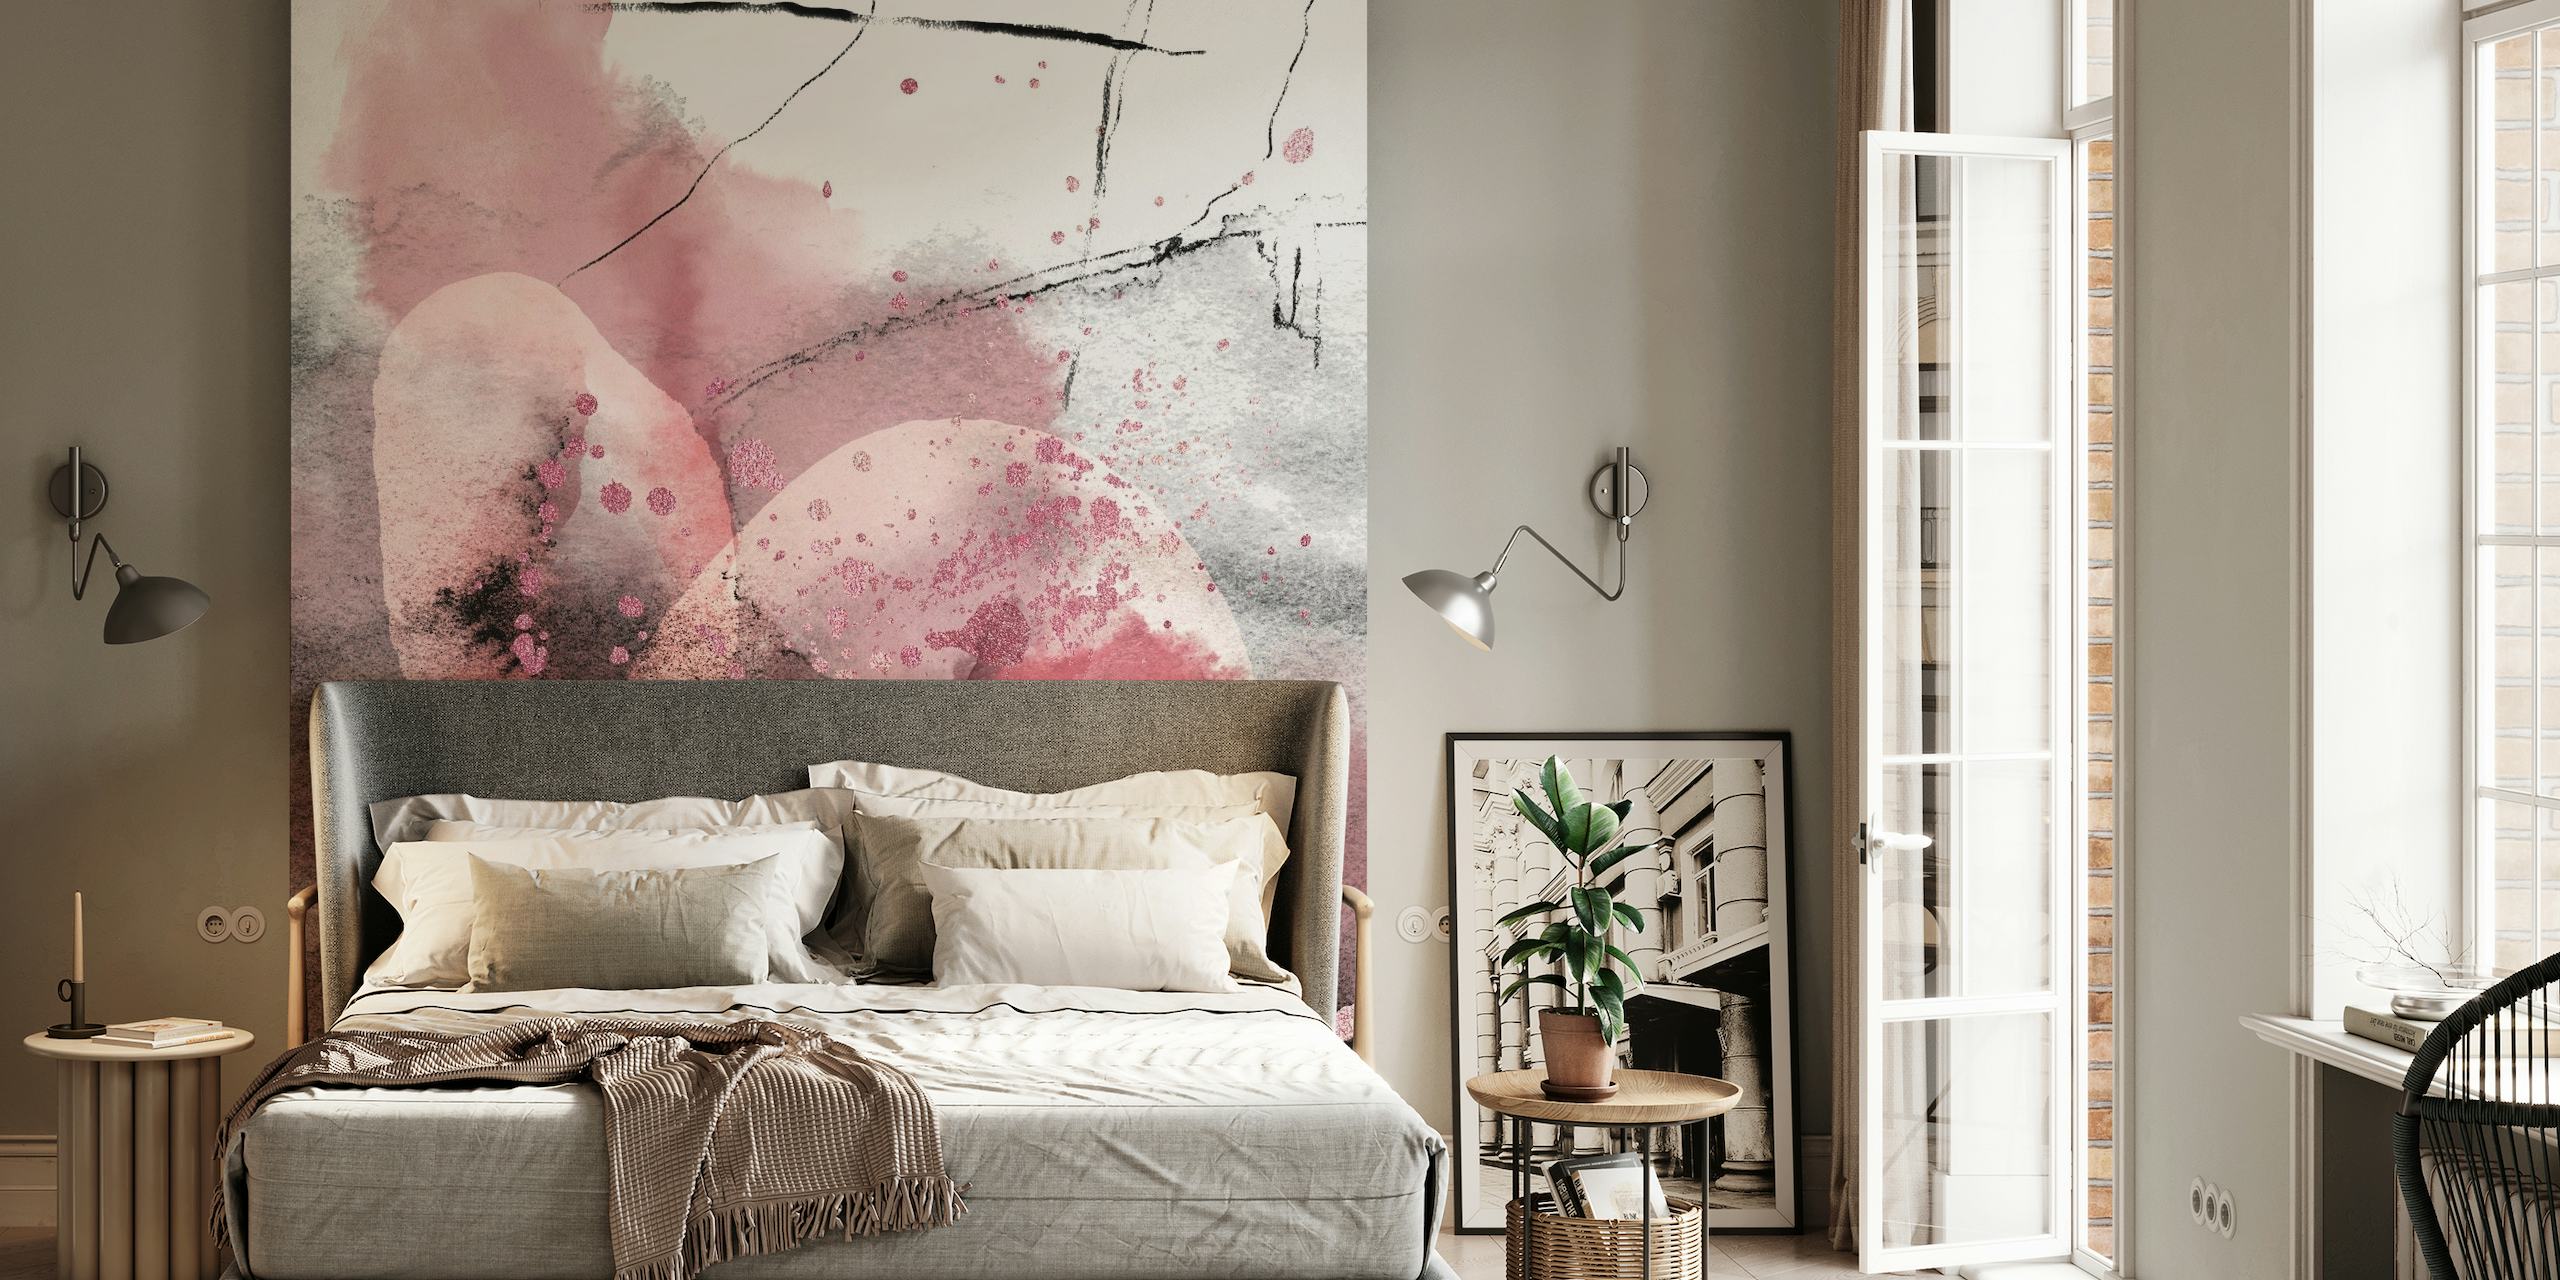 Abstract rose-tinted wall mural with pink and gray watercolor patterns and bold ink strokes